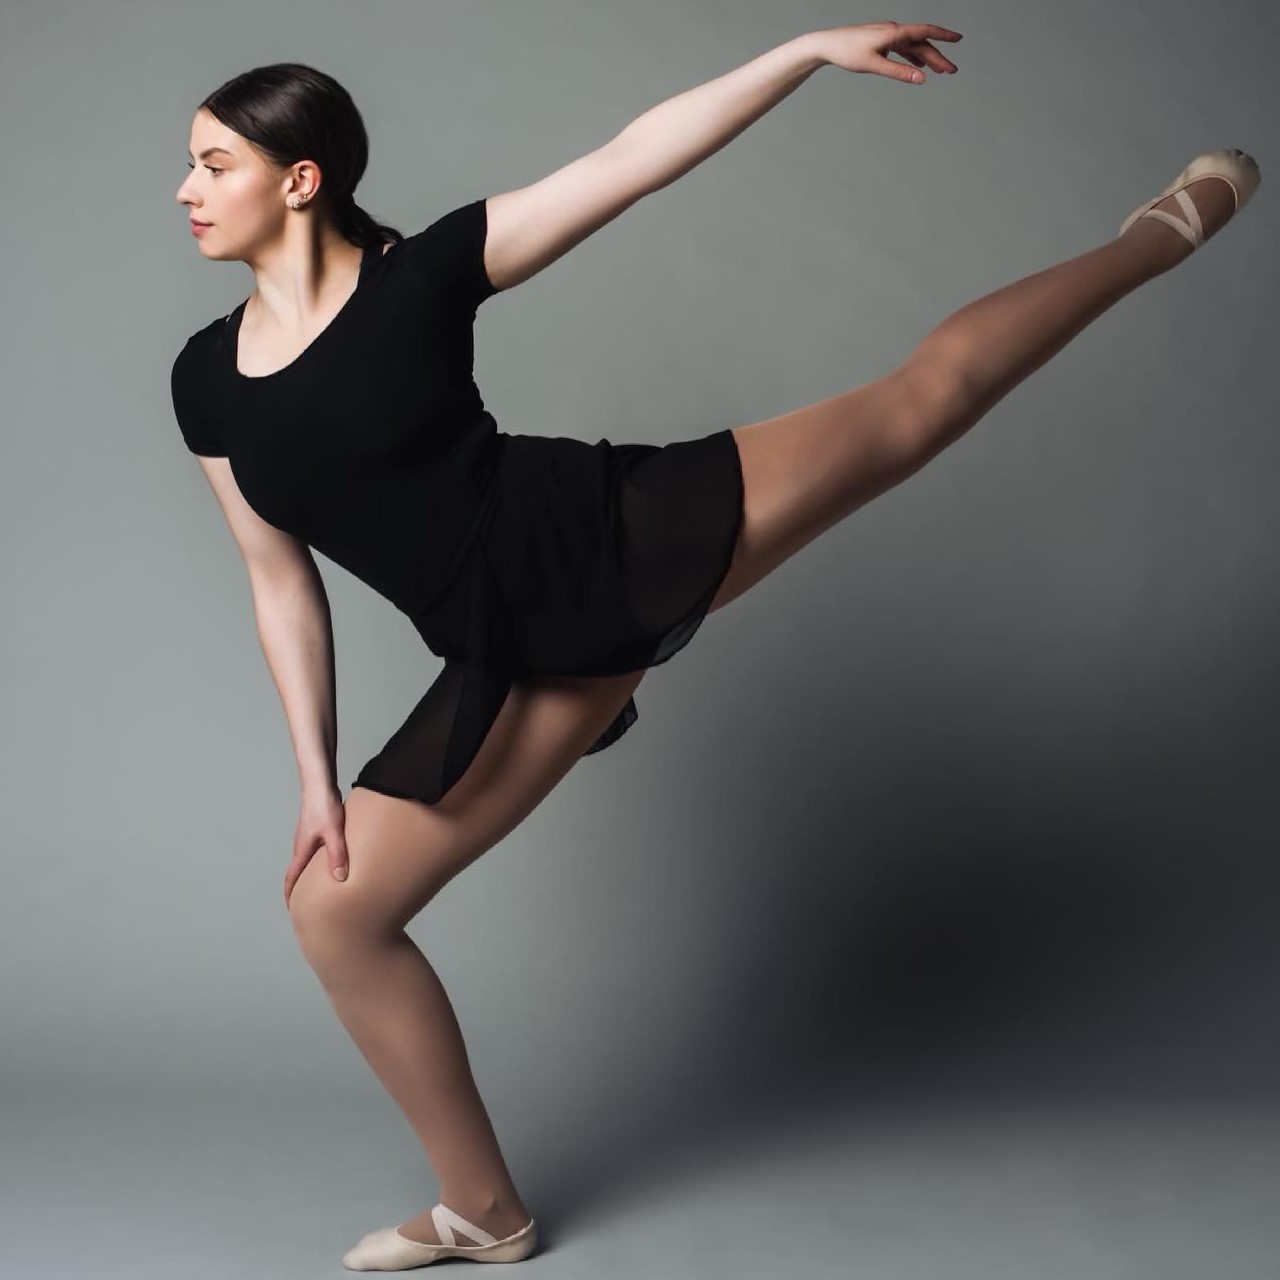 The photo shows a woman in a black dress, likely a ballet dancer, practicing her choreography. She is demonstrating balance and precision in her movements. The image is likely taken at Perform Art Studios.